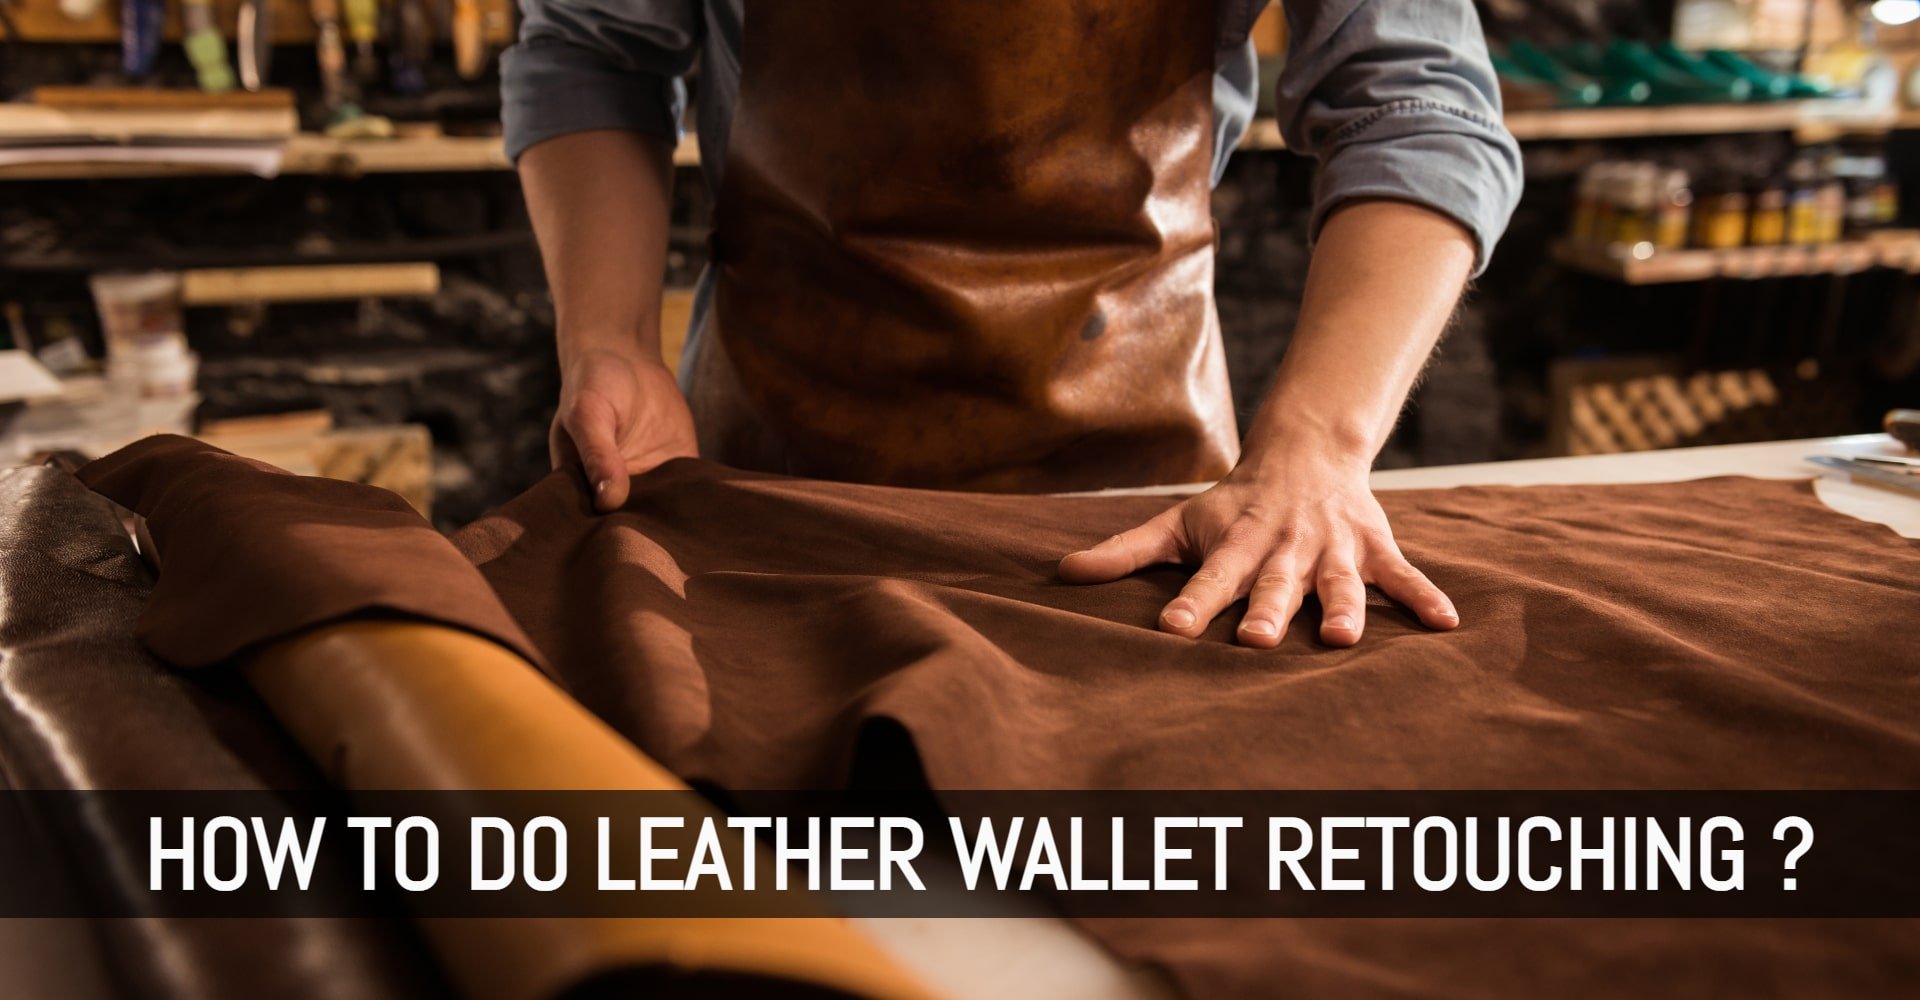 How to do leather wallet retouching